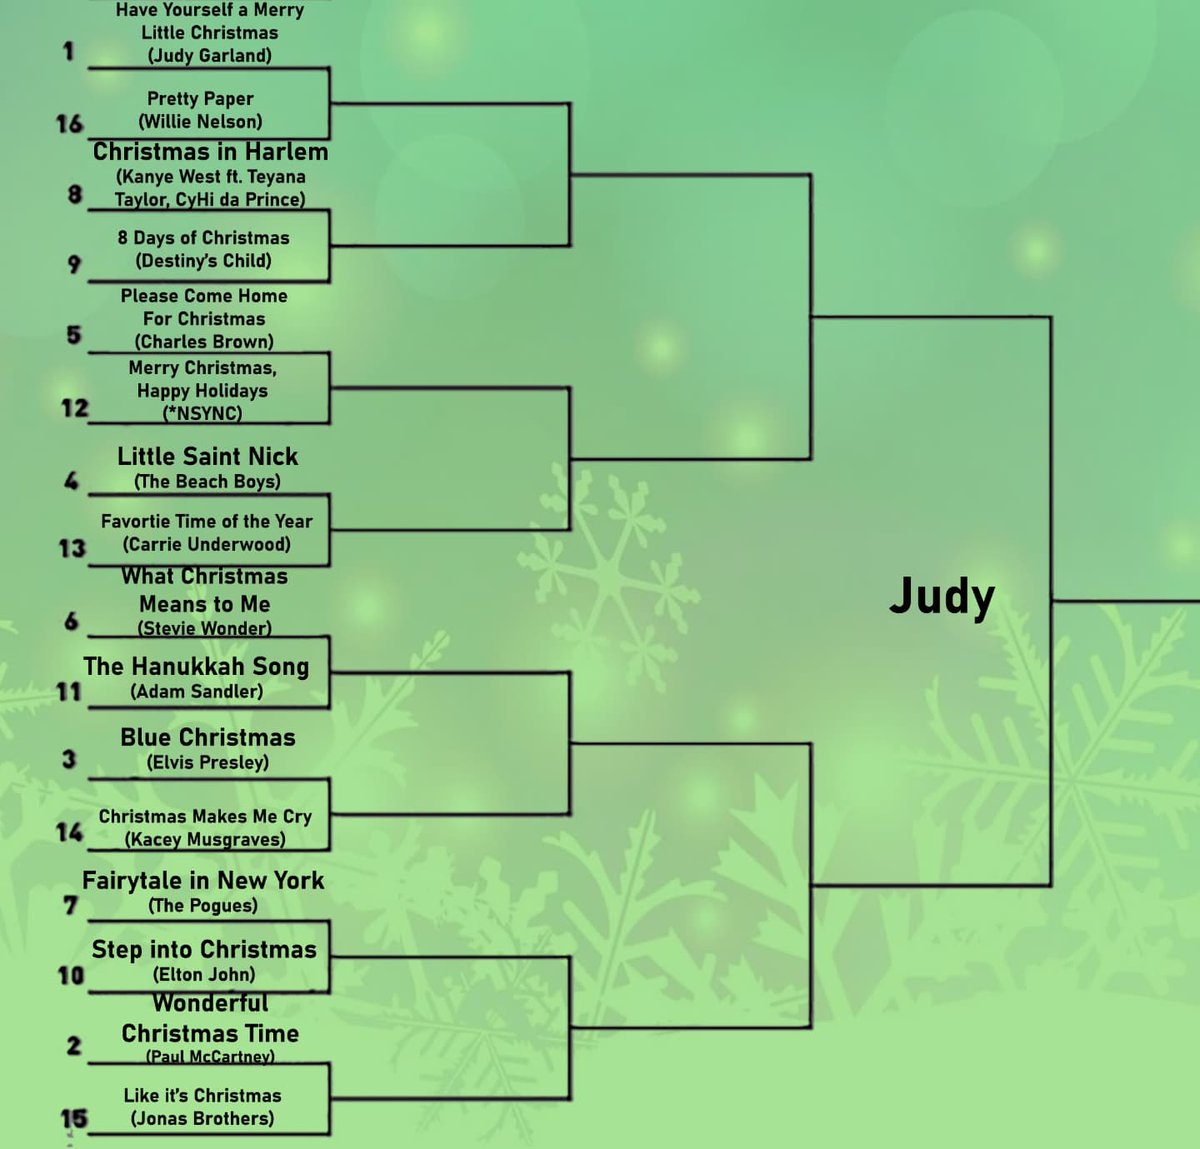 GOOD WEDNESDAY MORNING TO YOU. We are flying through the first round of votes. Here are the matchup previews for the Judy Region. Polls will show up in this tweet thread. #Christmas #holidaysongs